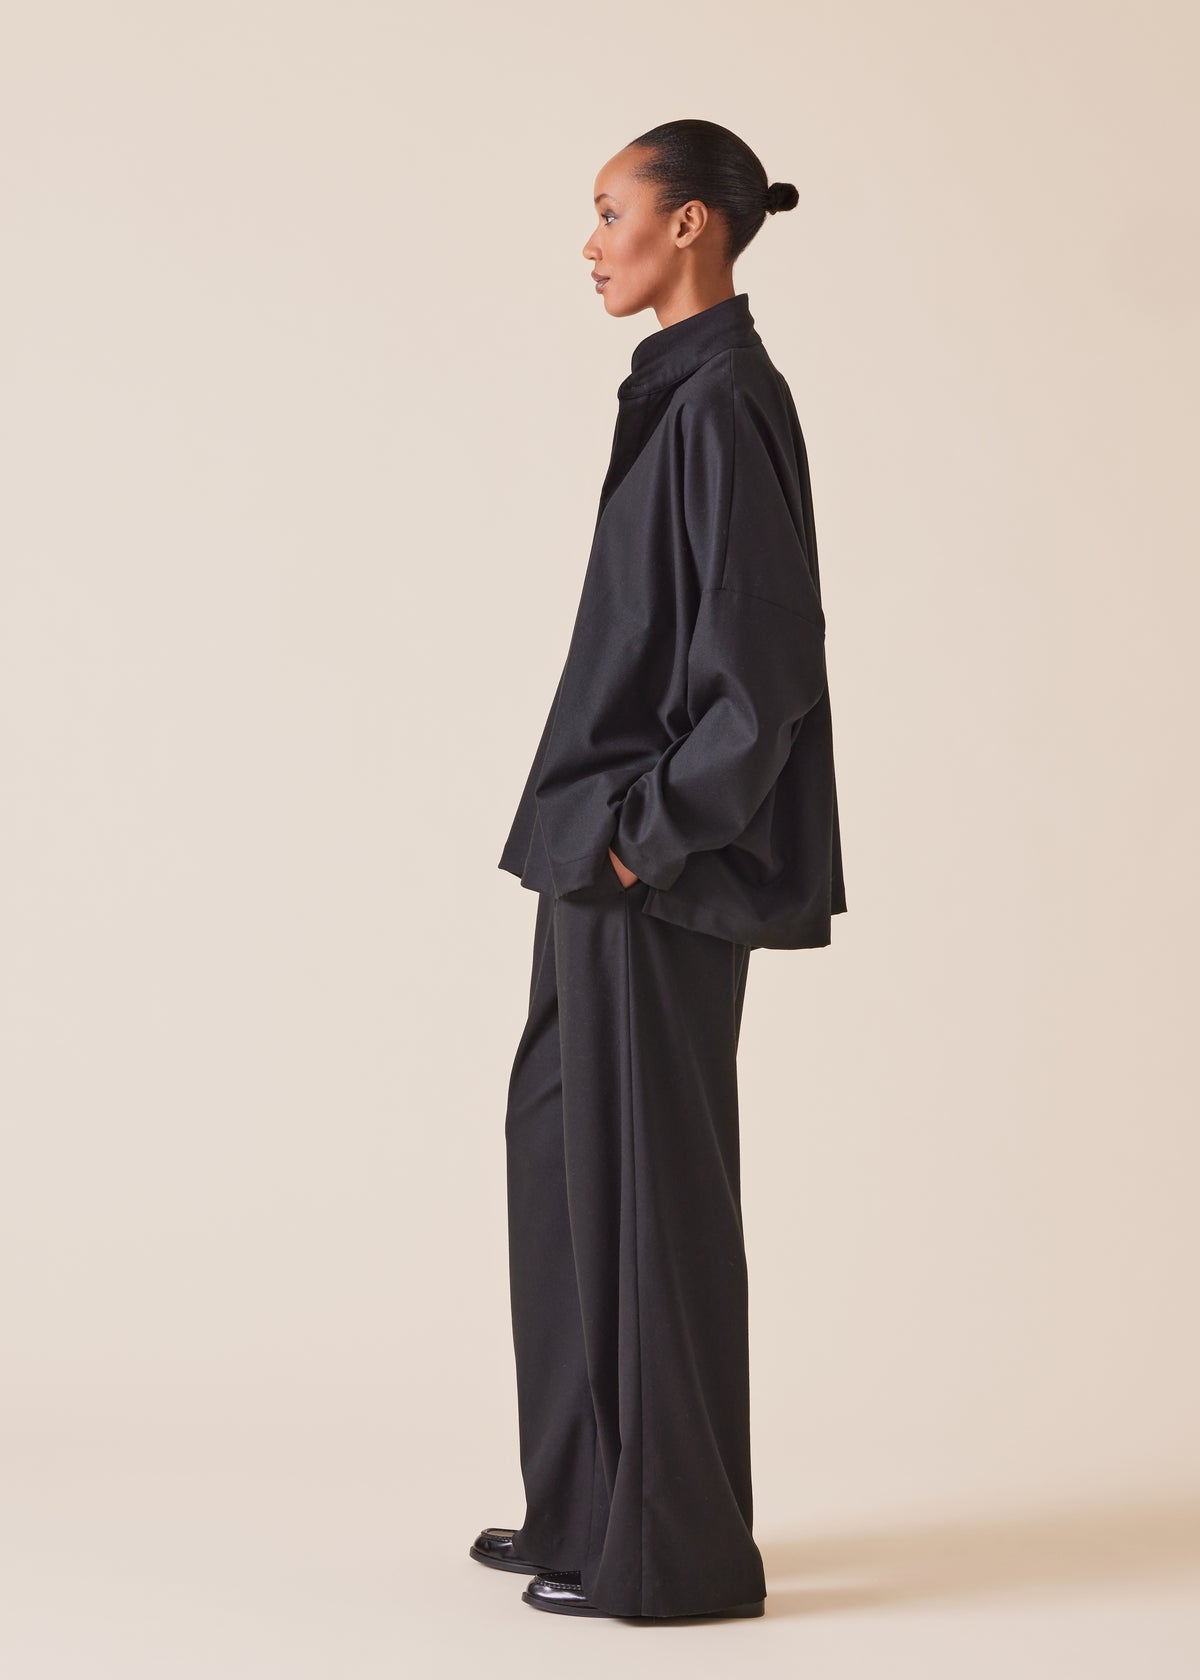 wool cashmere mix wide longer back shirt with double stand collar - mid plus